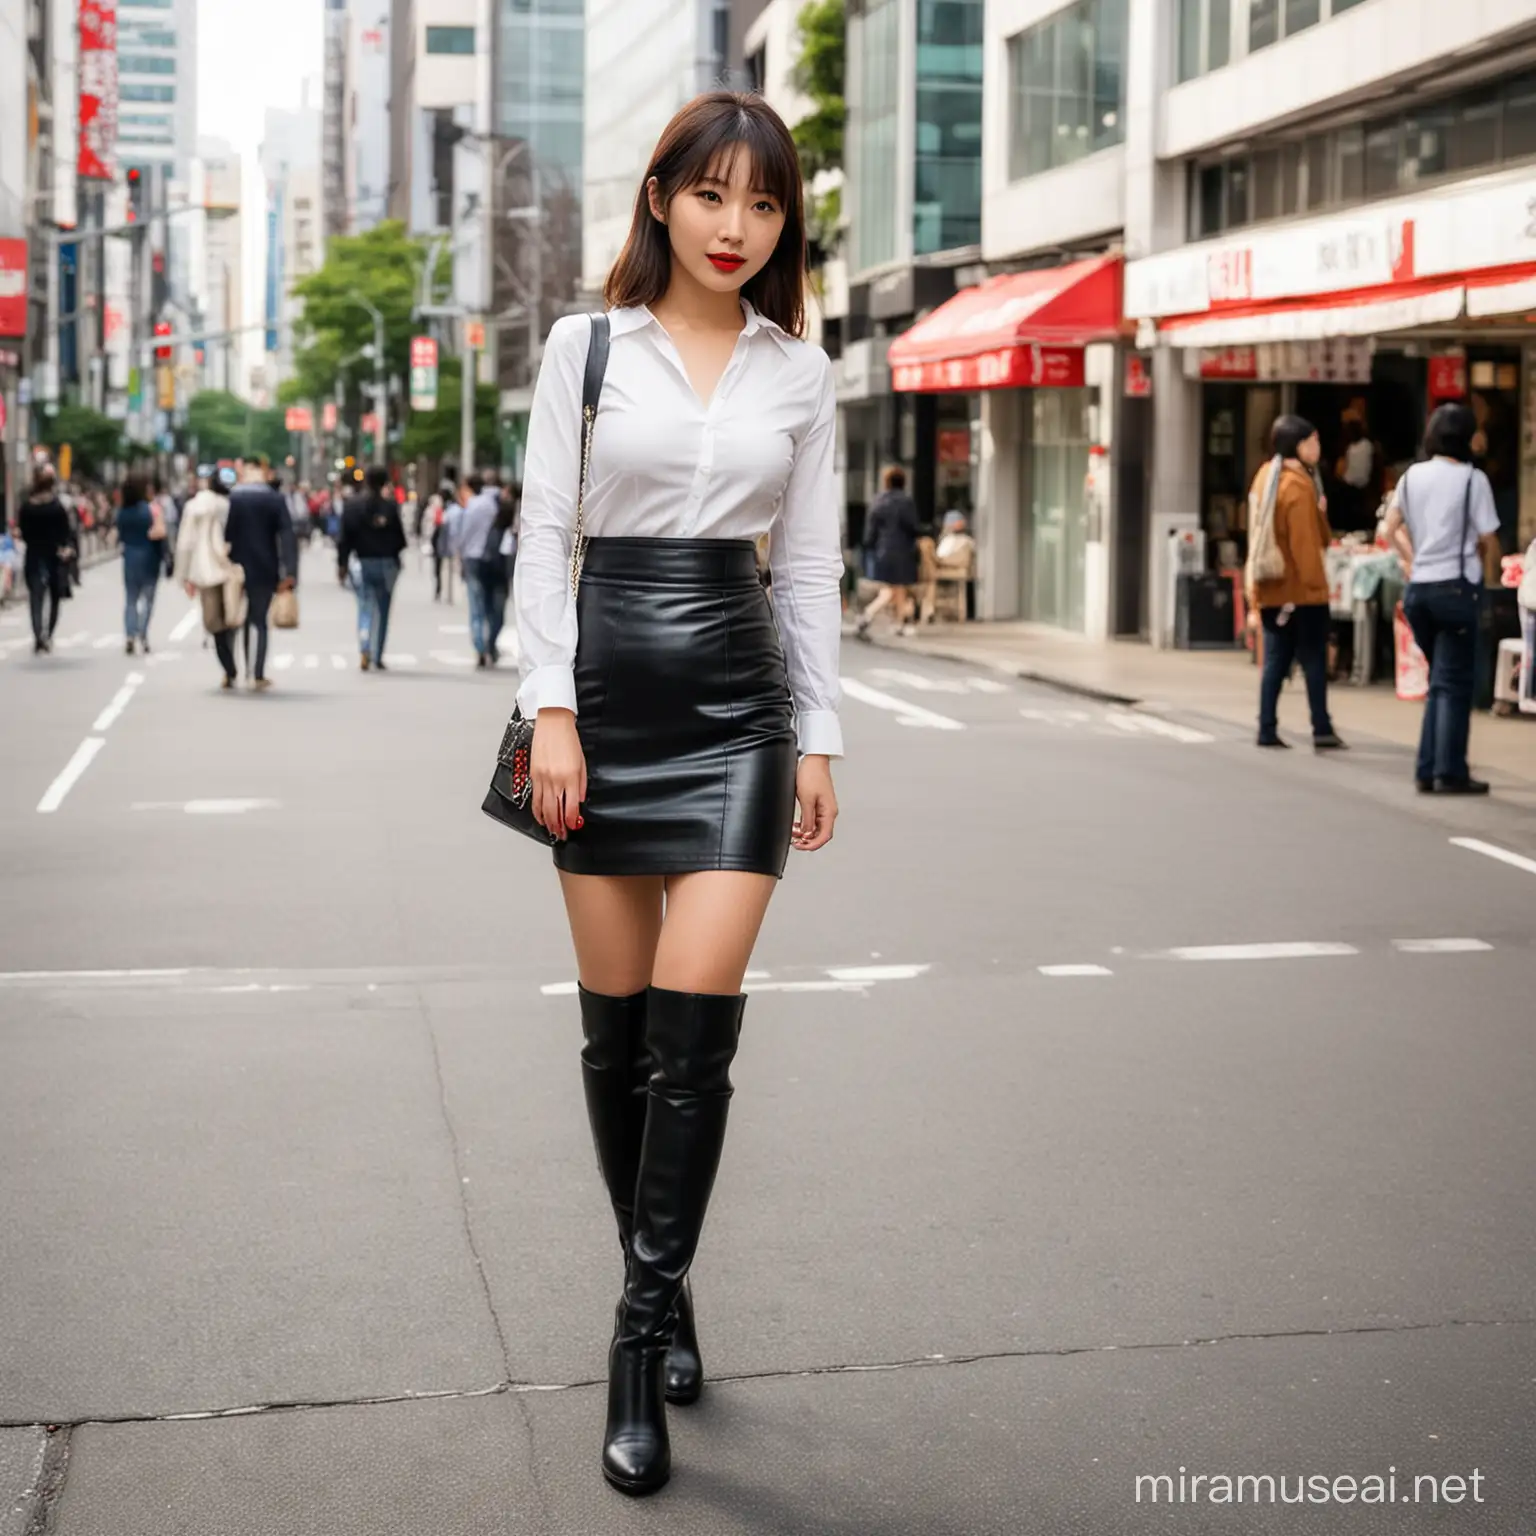 25 year old Japanese woman, full lips, red lipstick,  black leather mid length skirt, white long sleeve skirt, knee high 6 inch heel boots, downtown tokyo